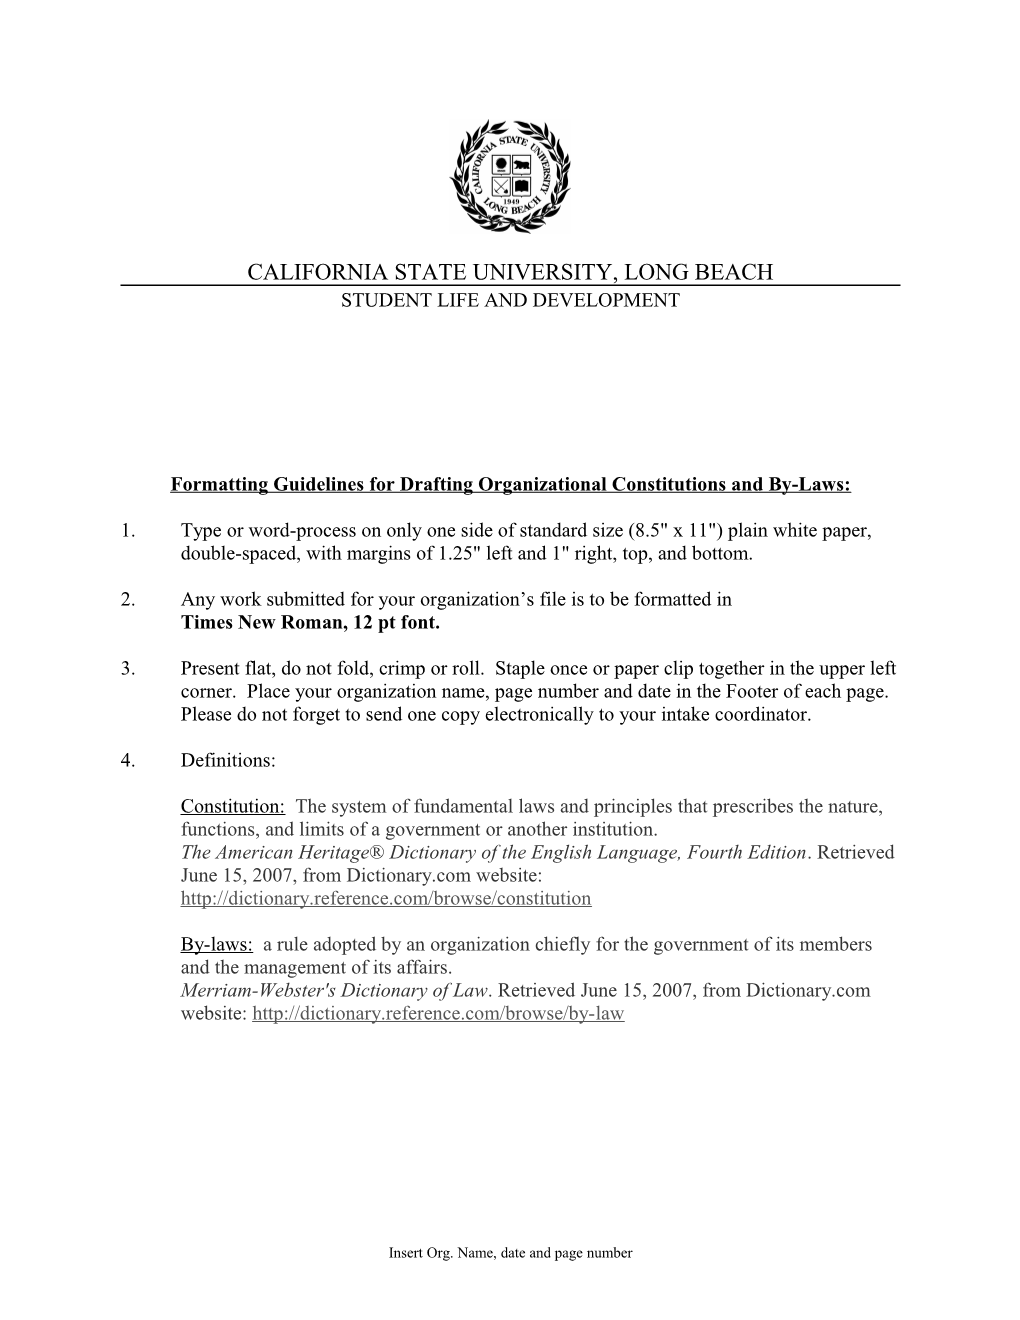 Formatting Guidelines for Drafting Organizational Constitutions and By-Laws